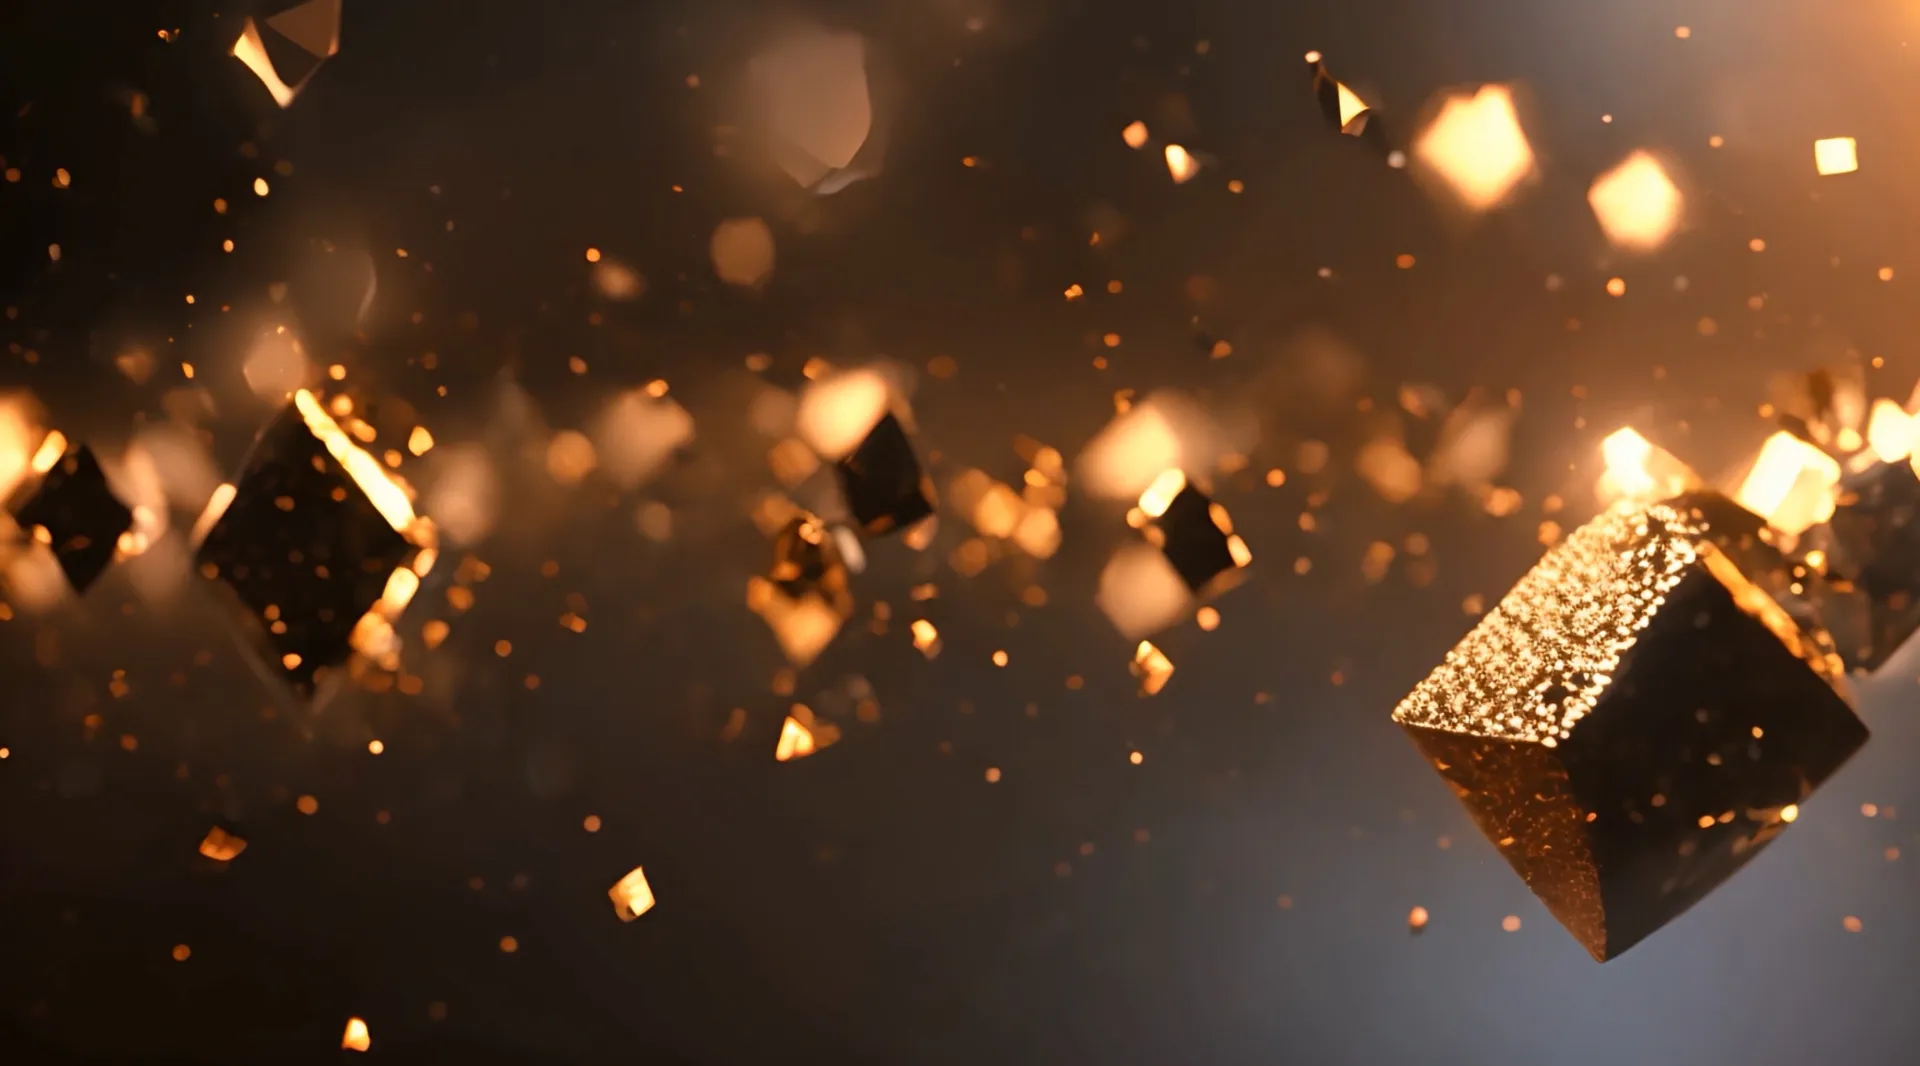 Golden Fragments Geometric Shapes Stock Footage